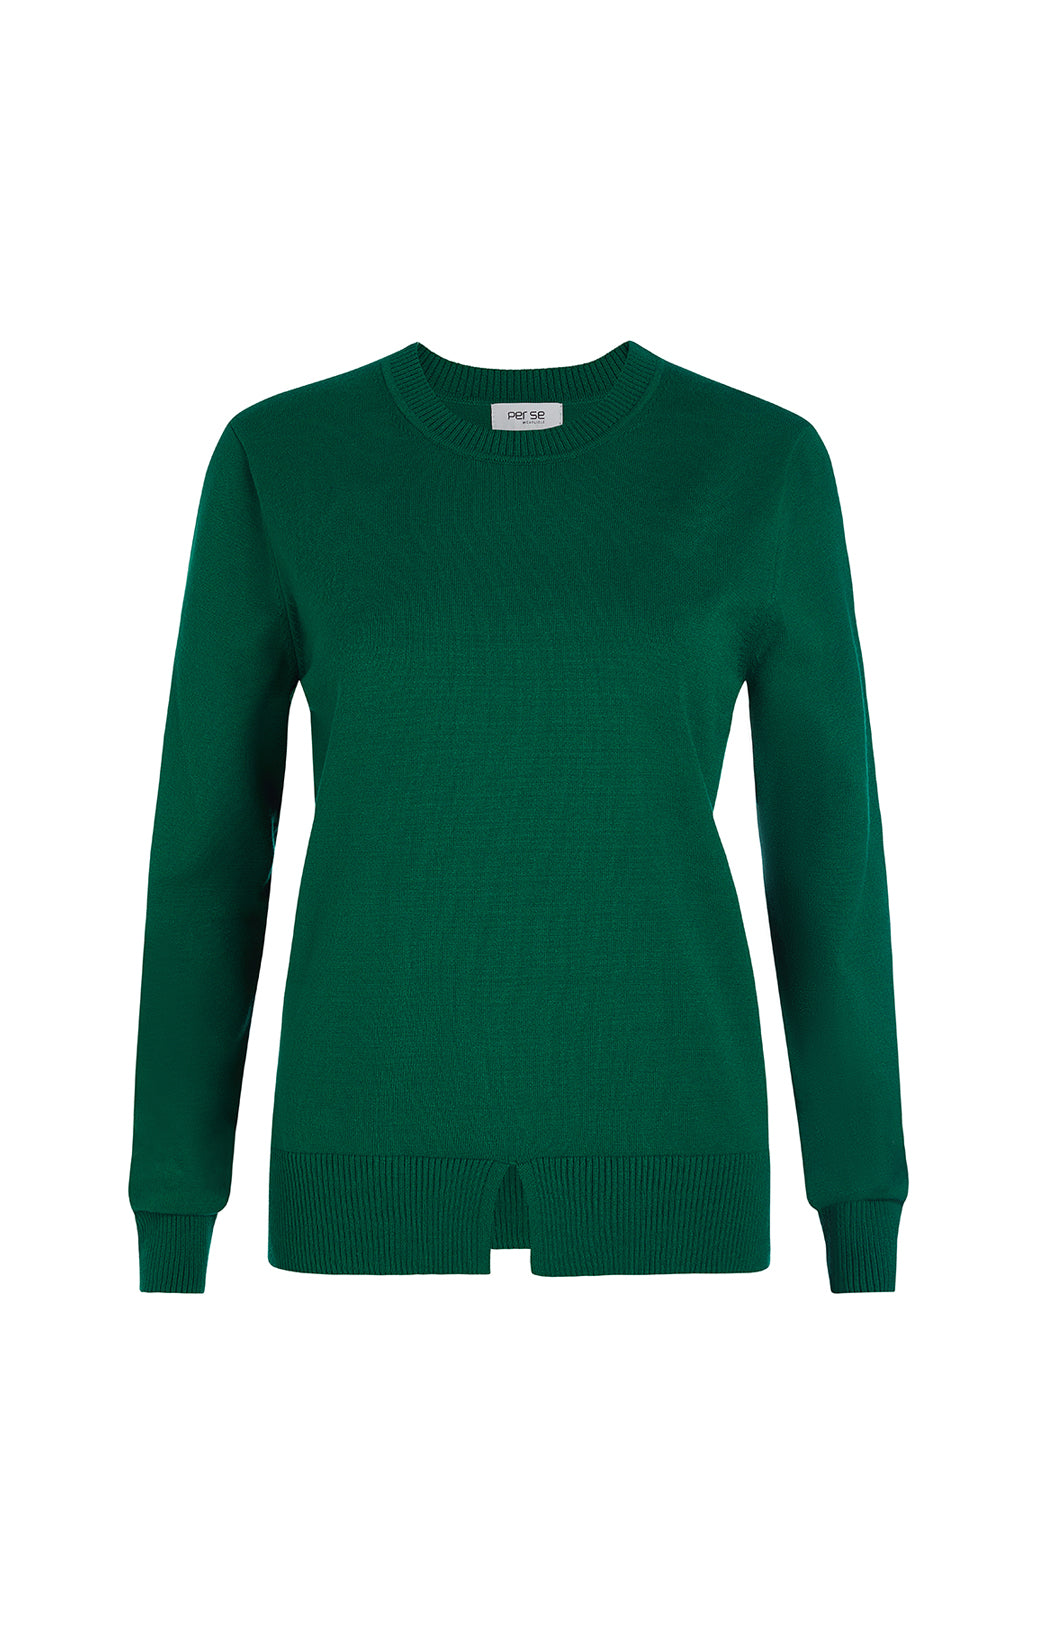 Debut-Pur - Cashmere V-Neck Pullover -  Product Image